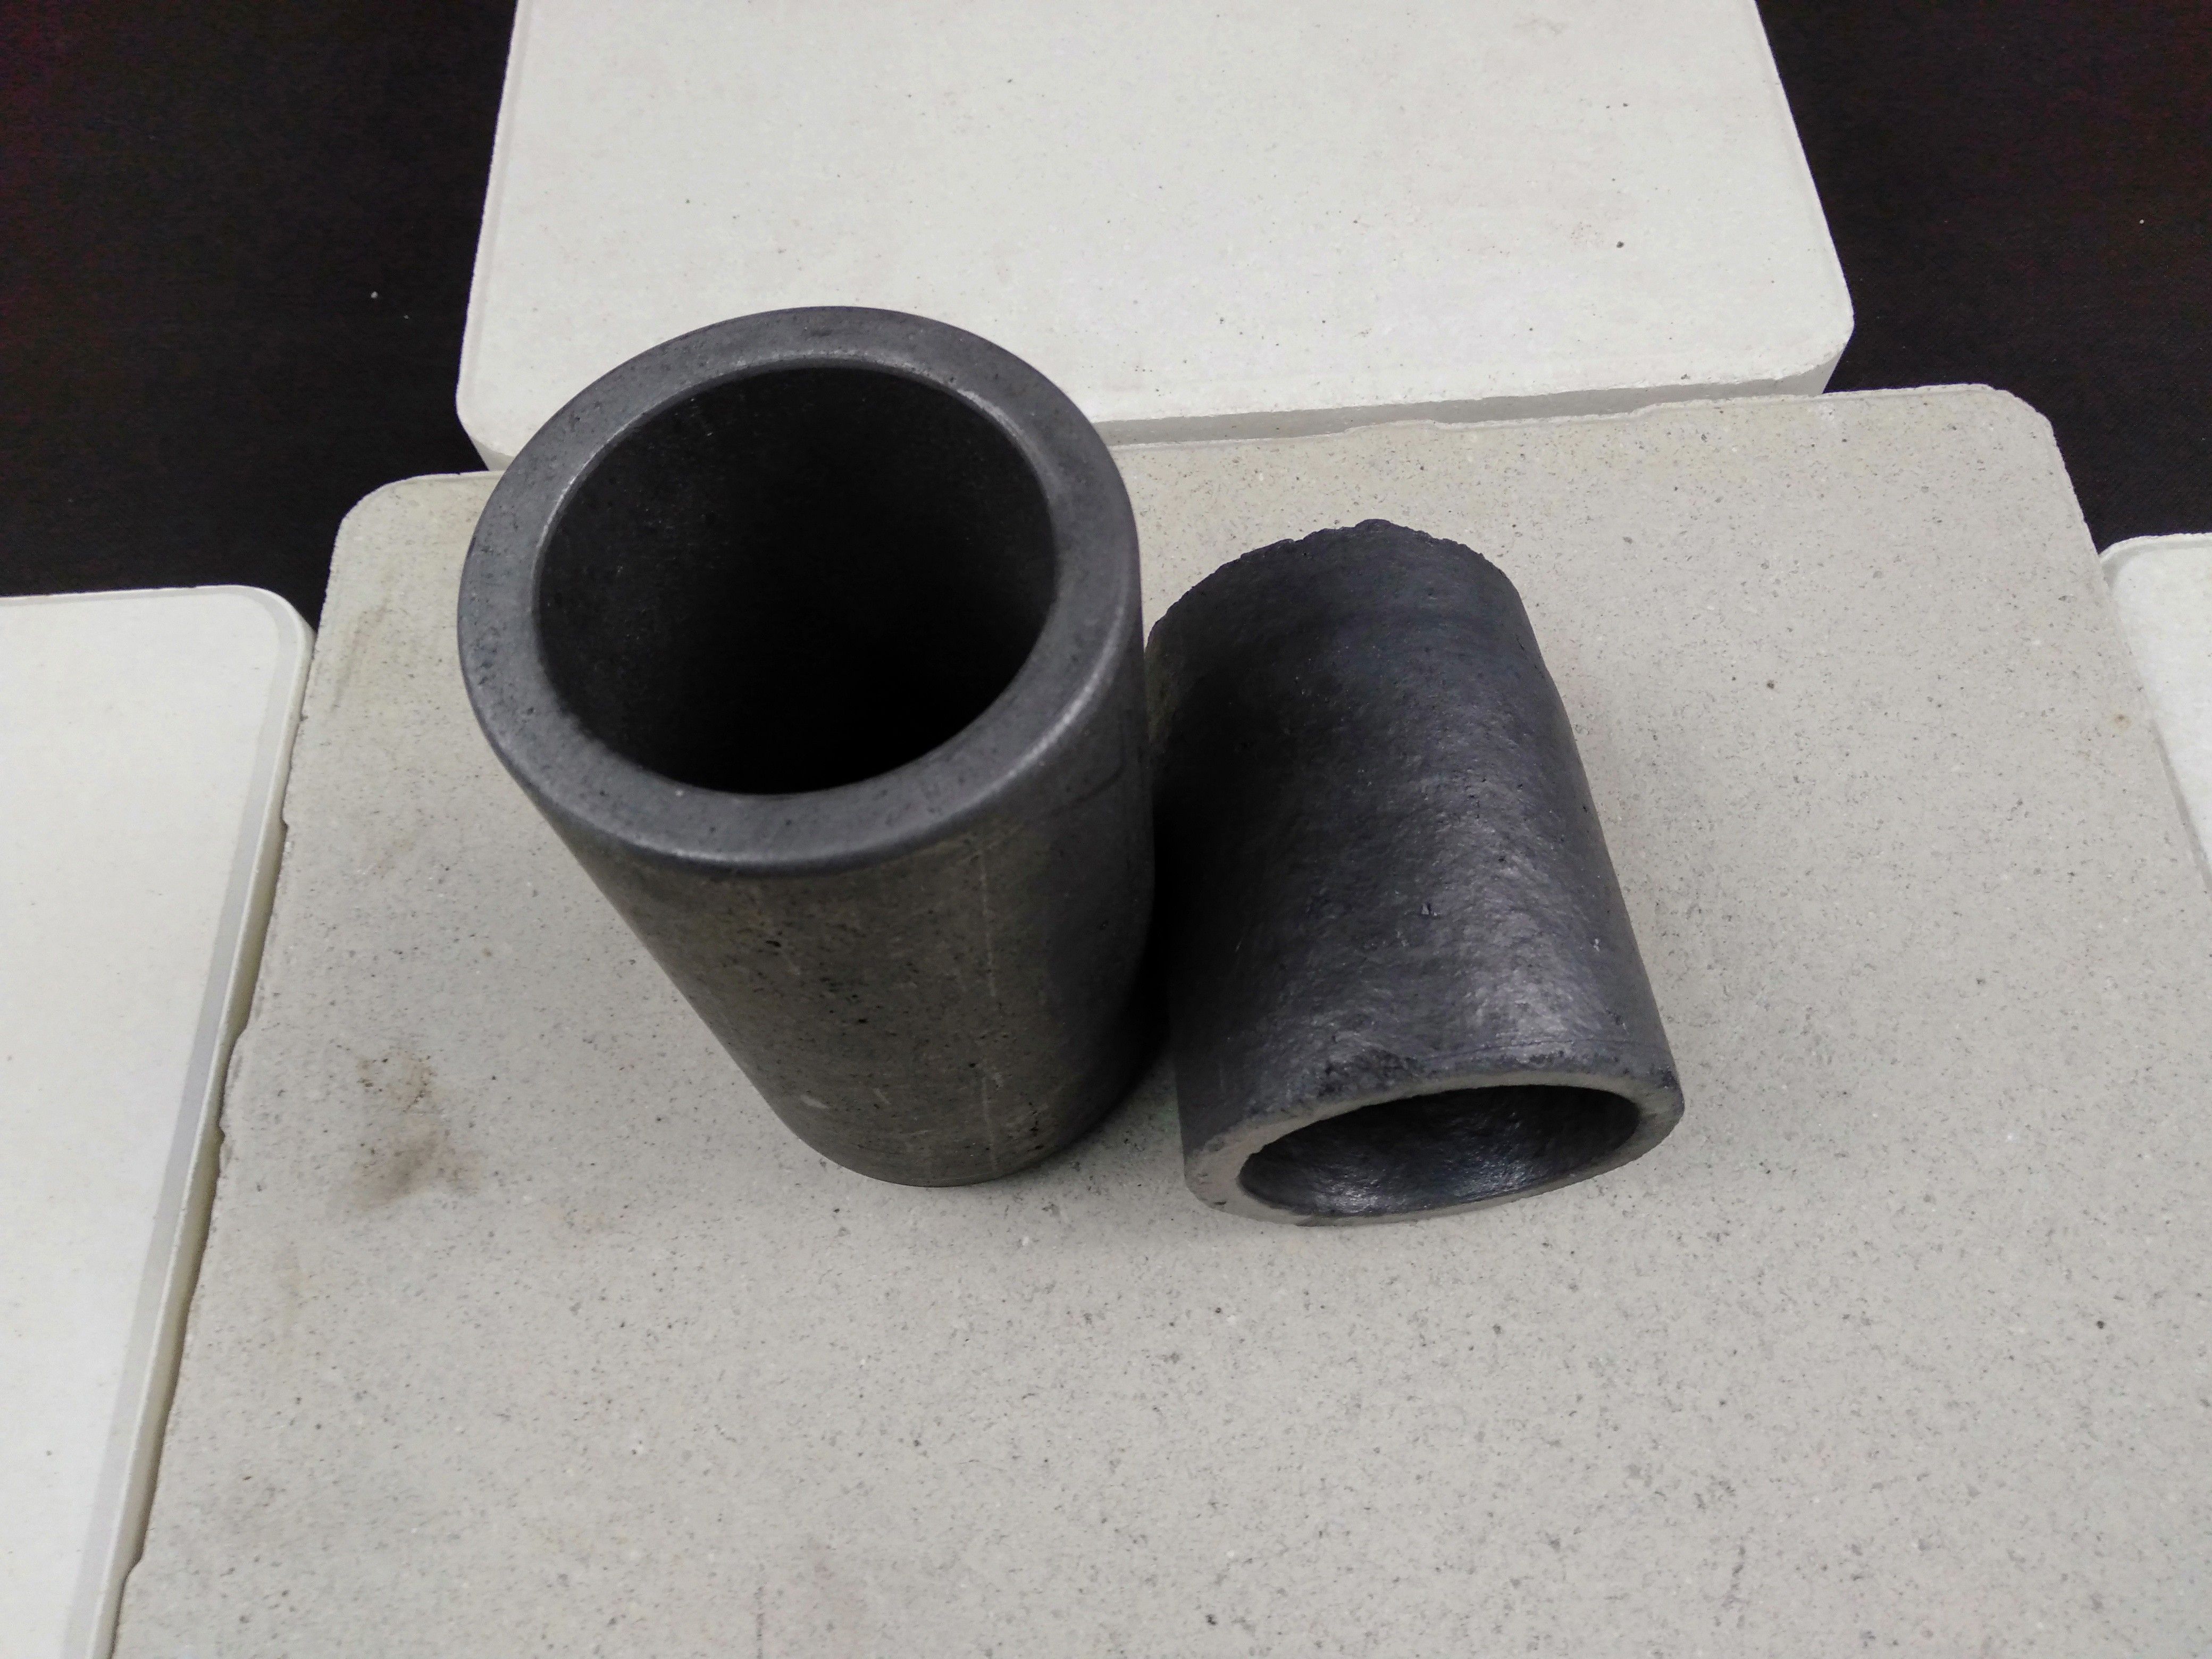 Wholesale Artificial Graphite Furnace Aluminum Melting Crucible High Temperature Resistance from china suppliers